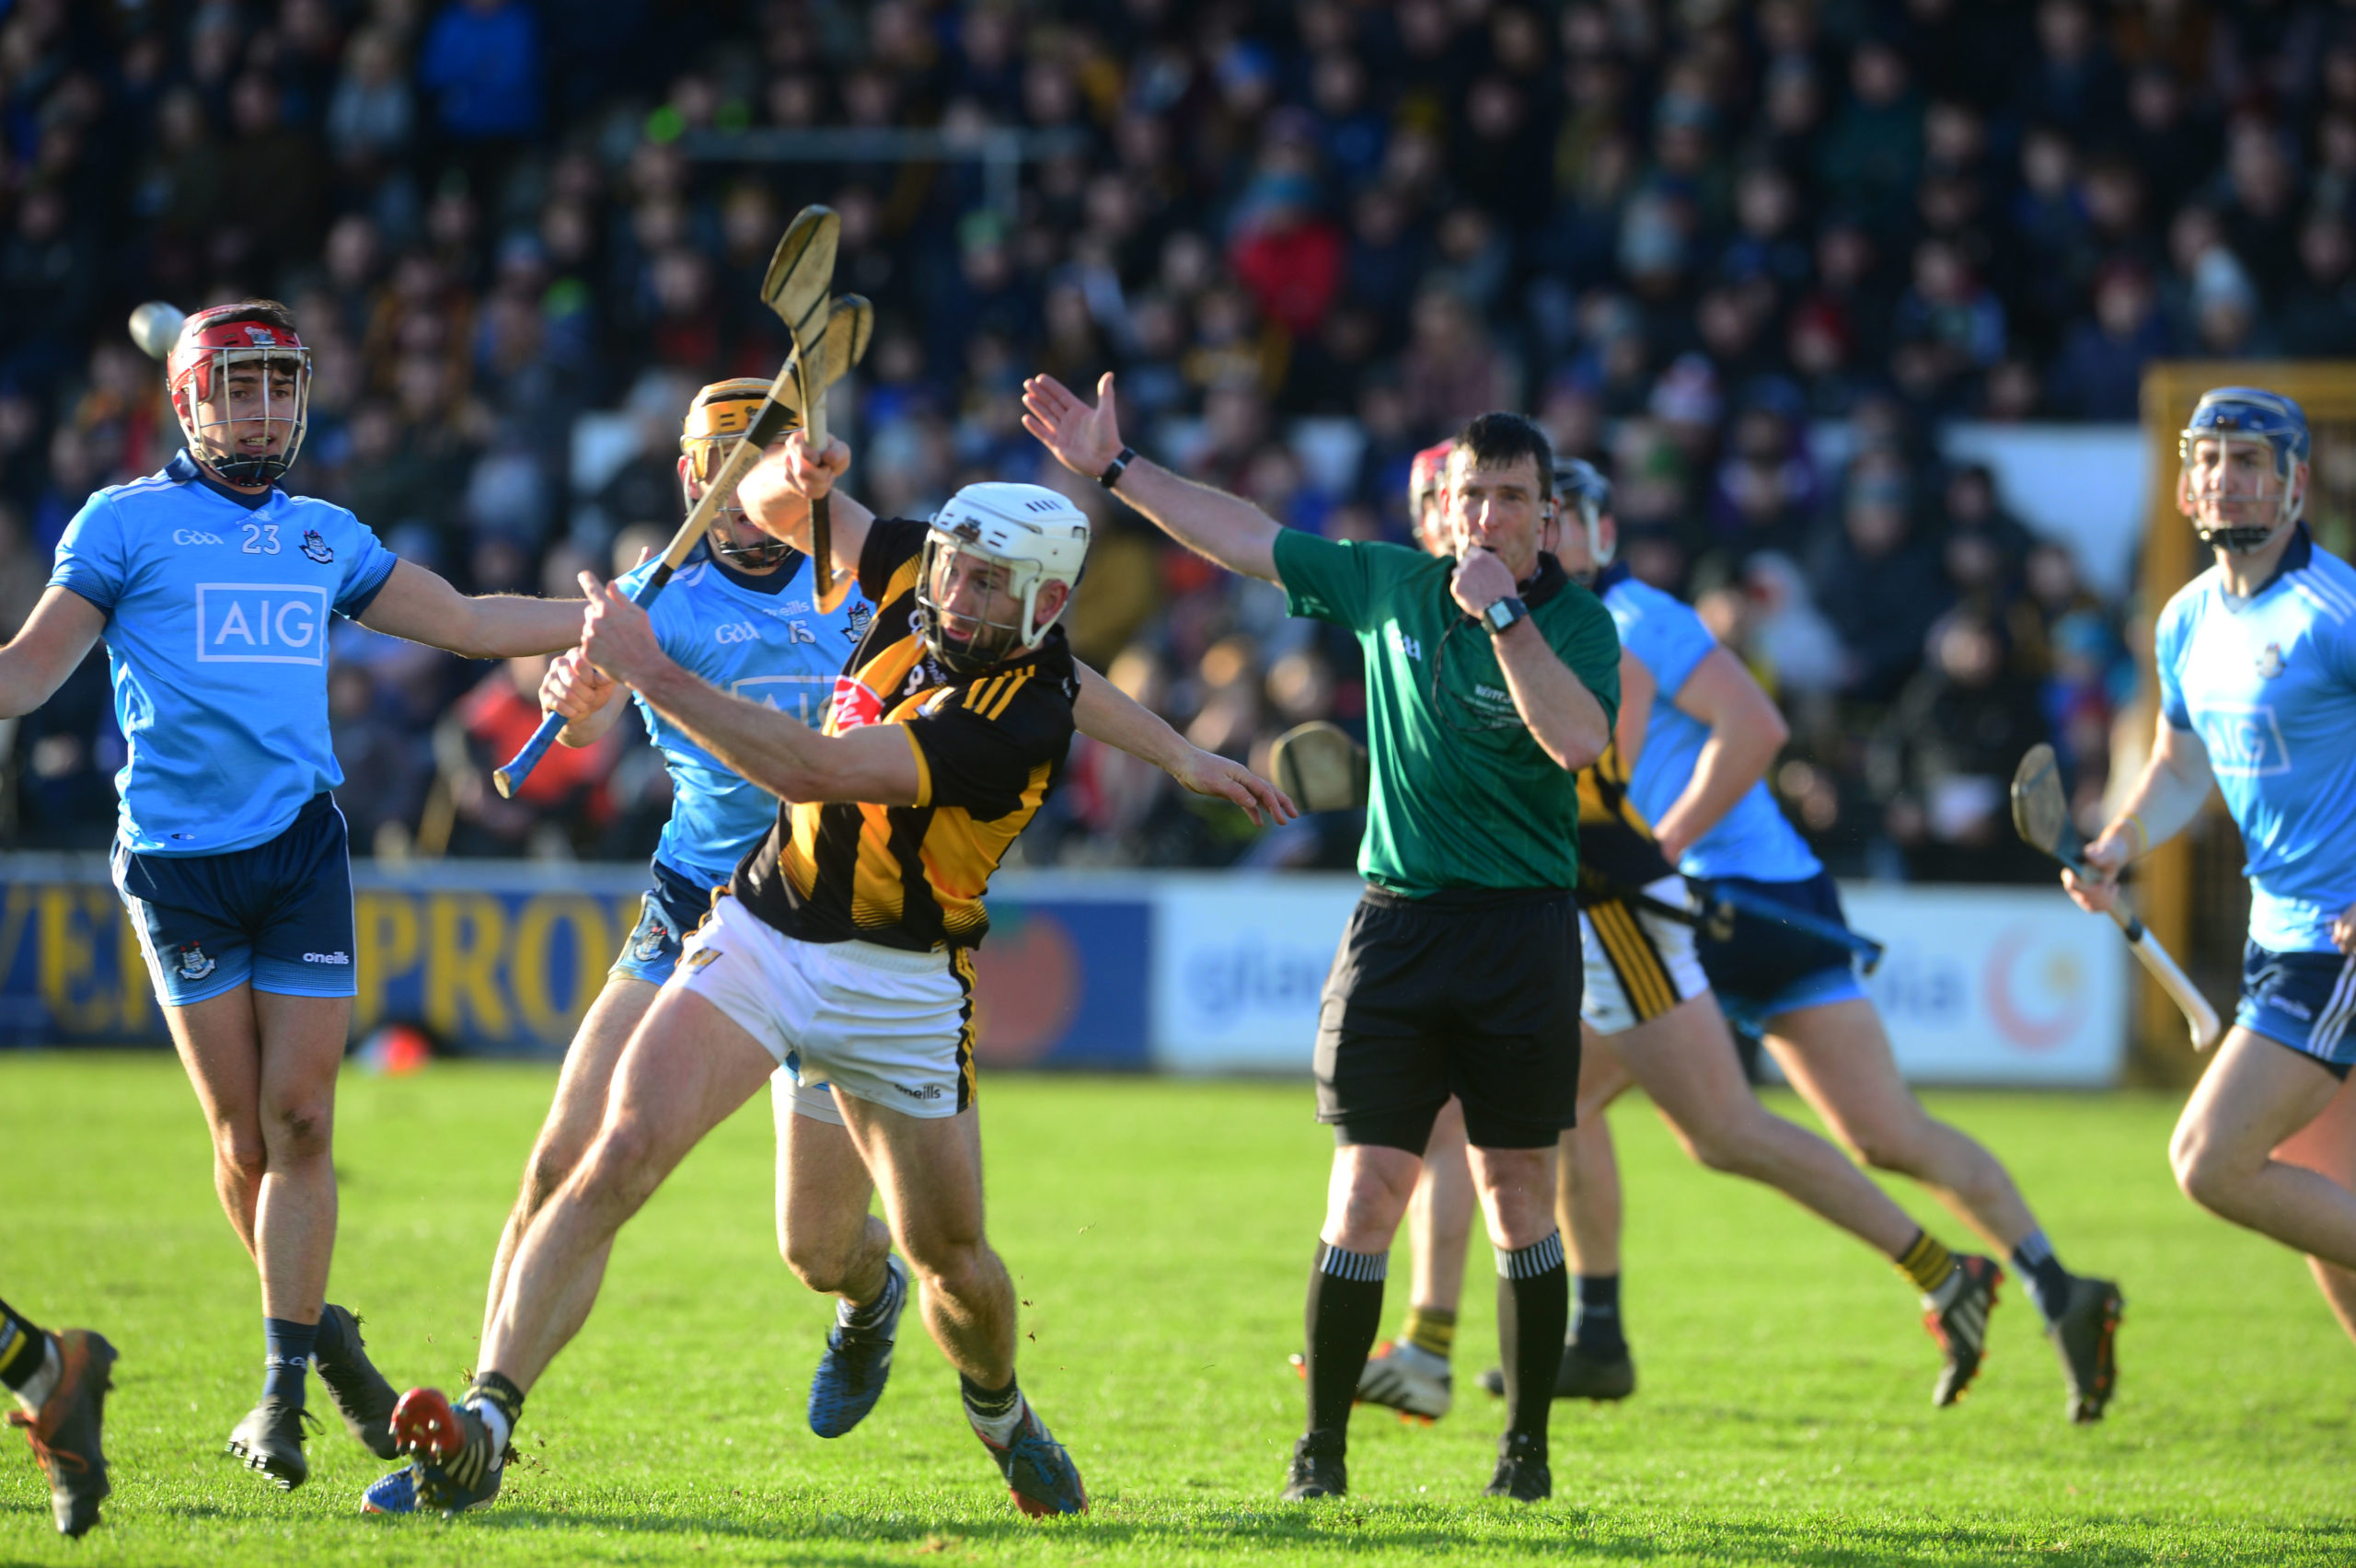 Kilkenny Senior And Minor Teams Named Ahead of Saturday’s Leinster Championship Games